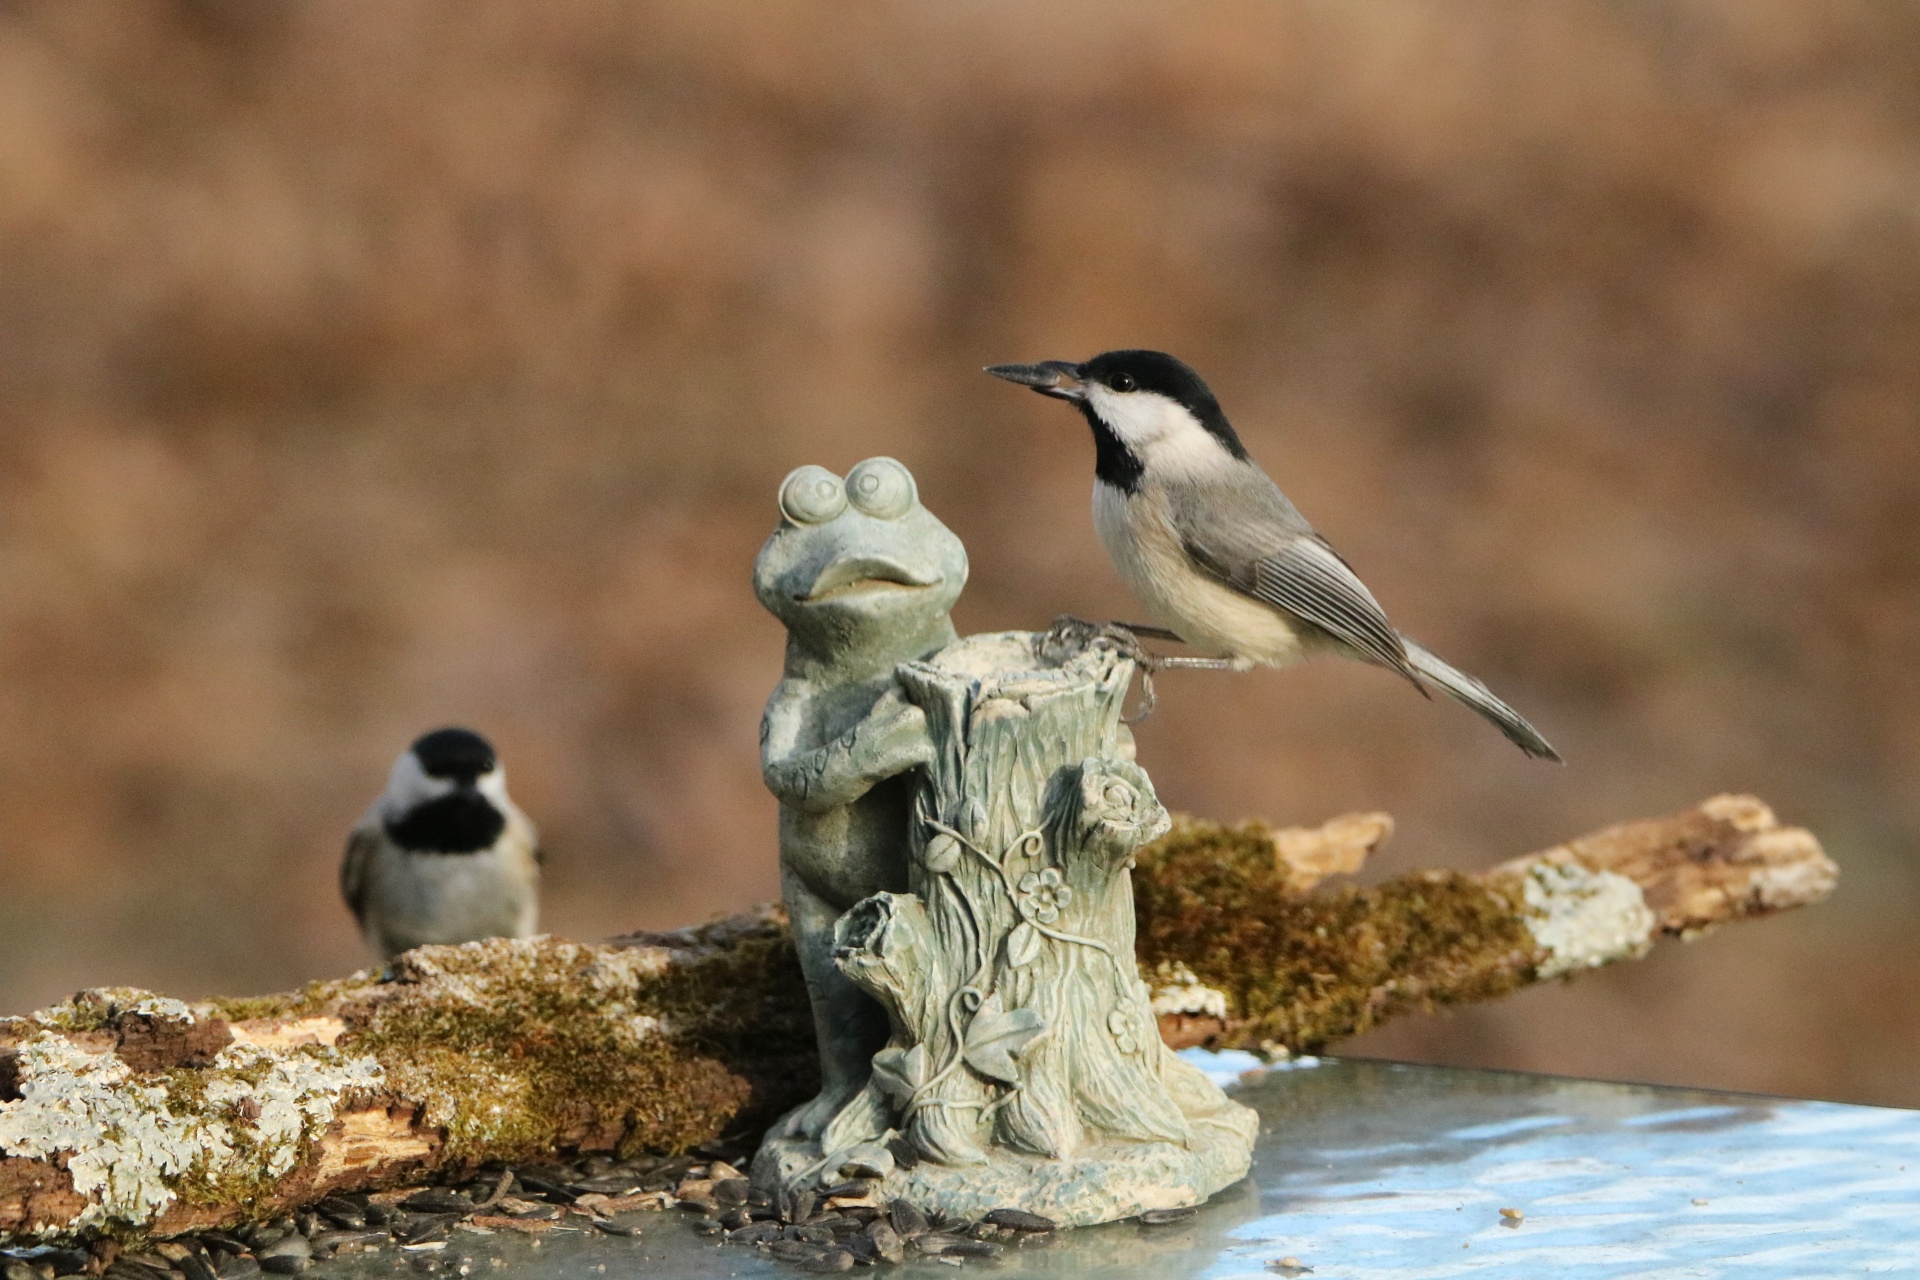 Two Black-capped Chickadees